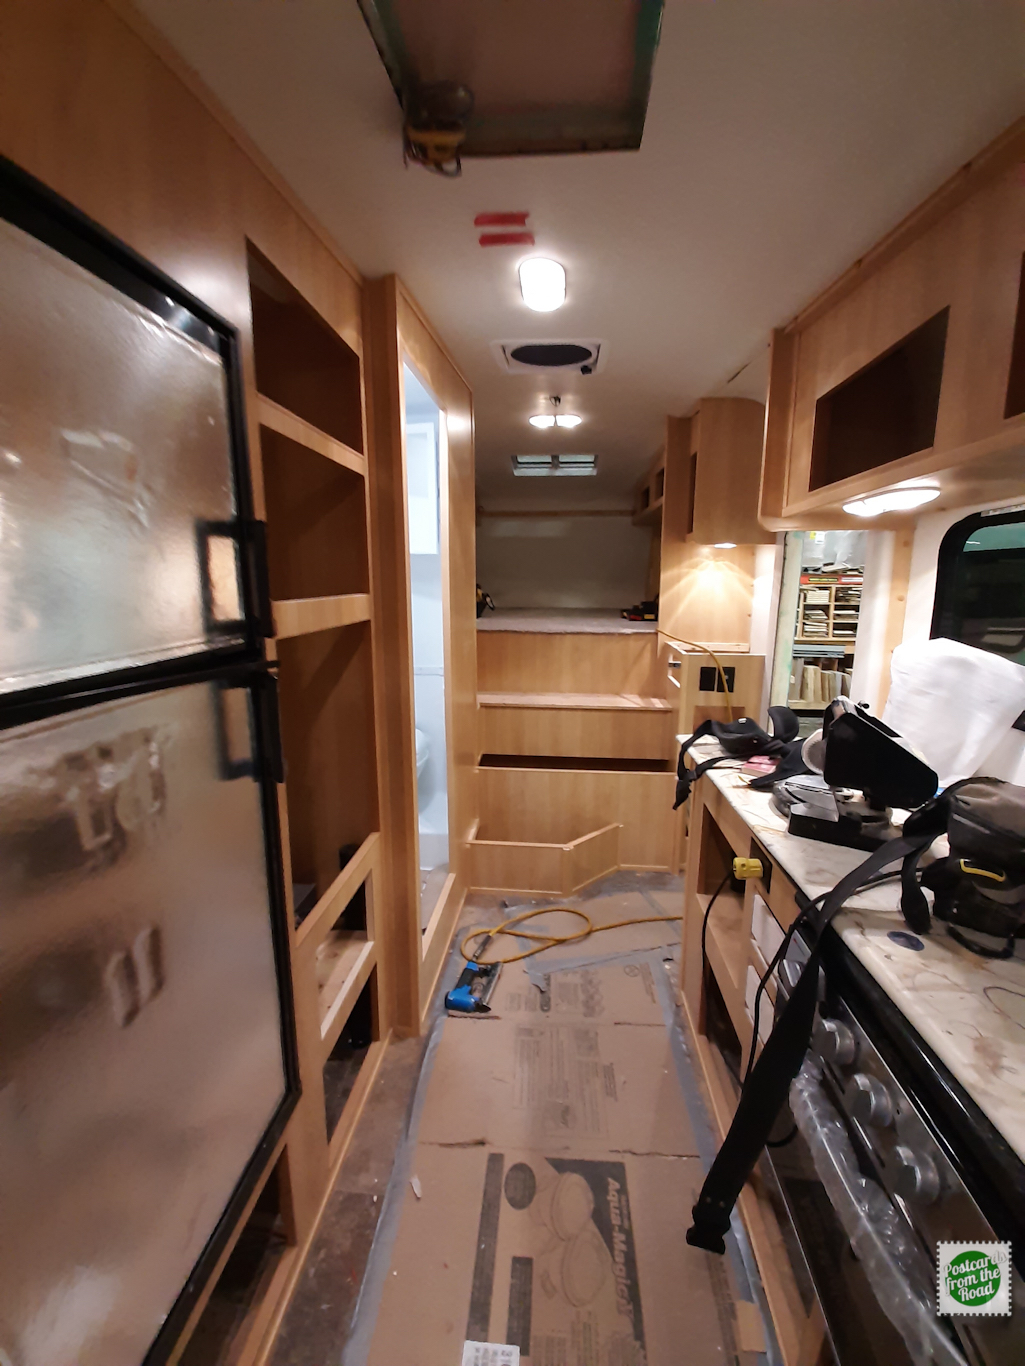 The oven is in the foreground on the right. The refrigerator, flush mount stovetop &amp; formica counter top all still have the protective covering in place. The ceiling Maxx Fan has been added – it&#039;s visible betweent the two ceiling lights.